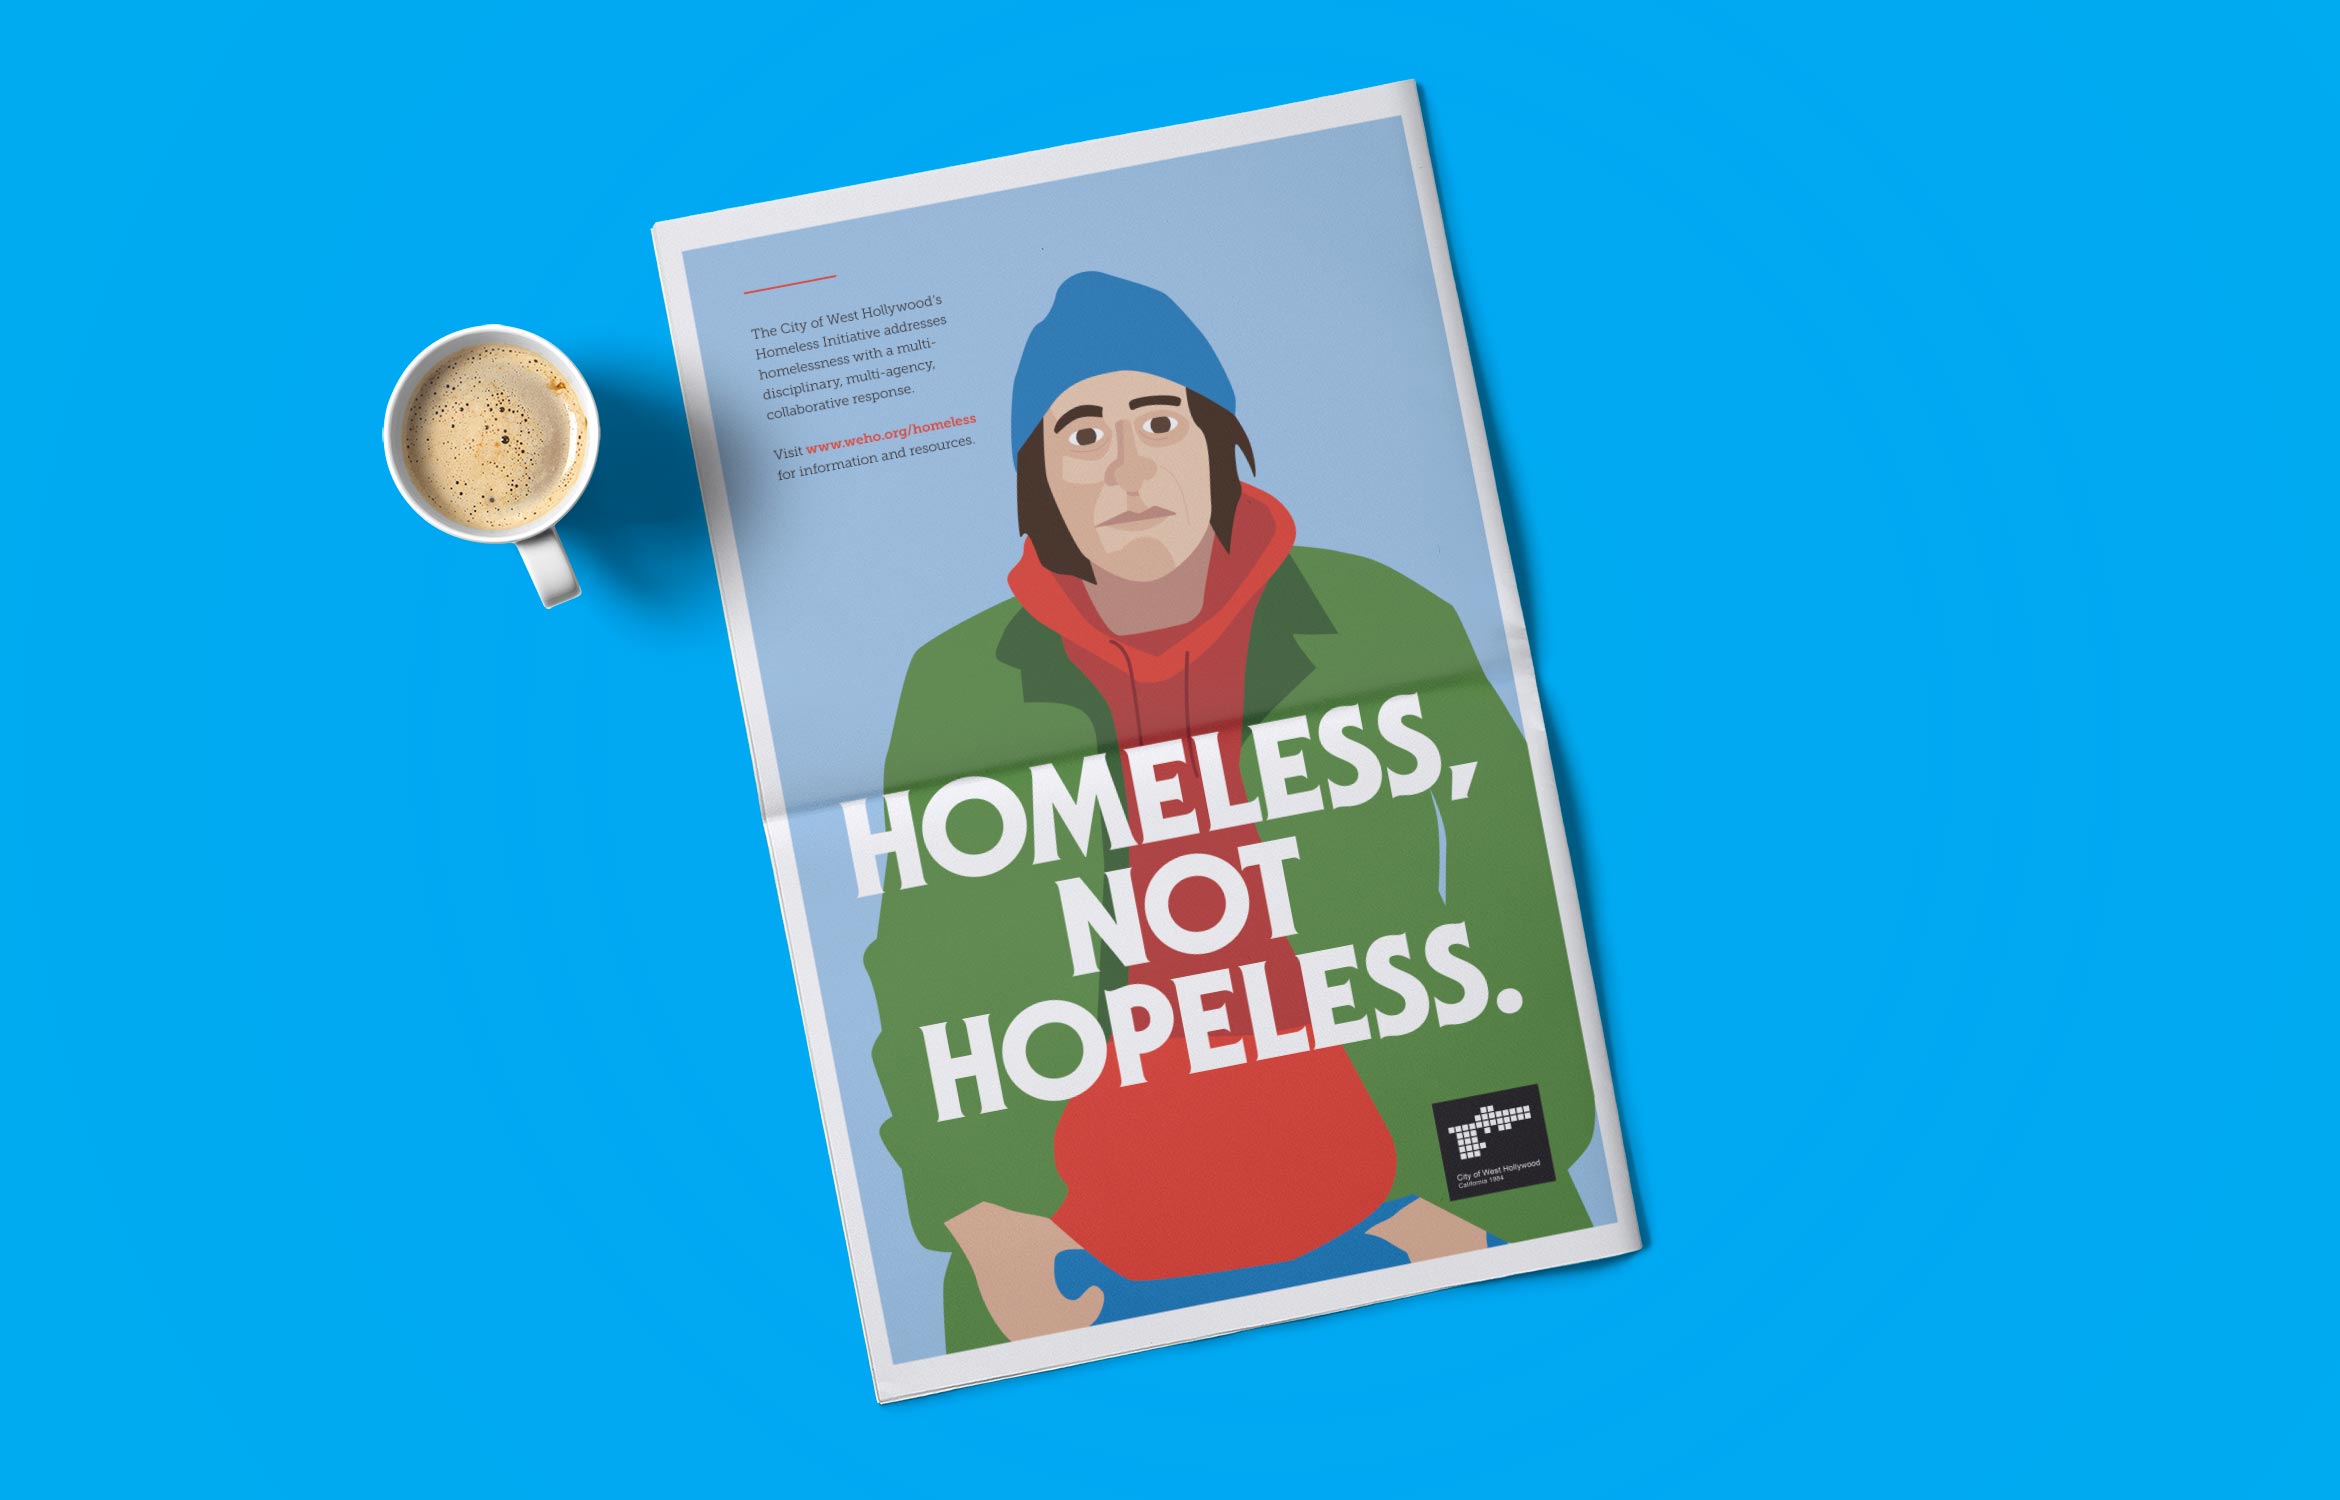 City of West Hollywood Homeless Services campaign by Kilter